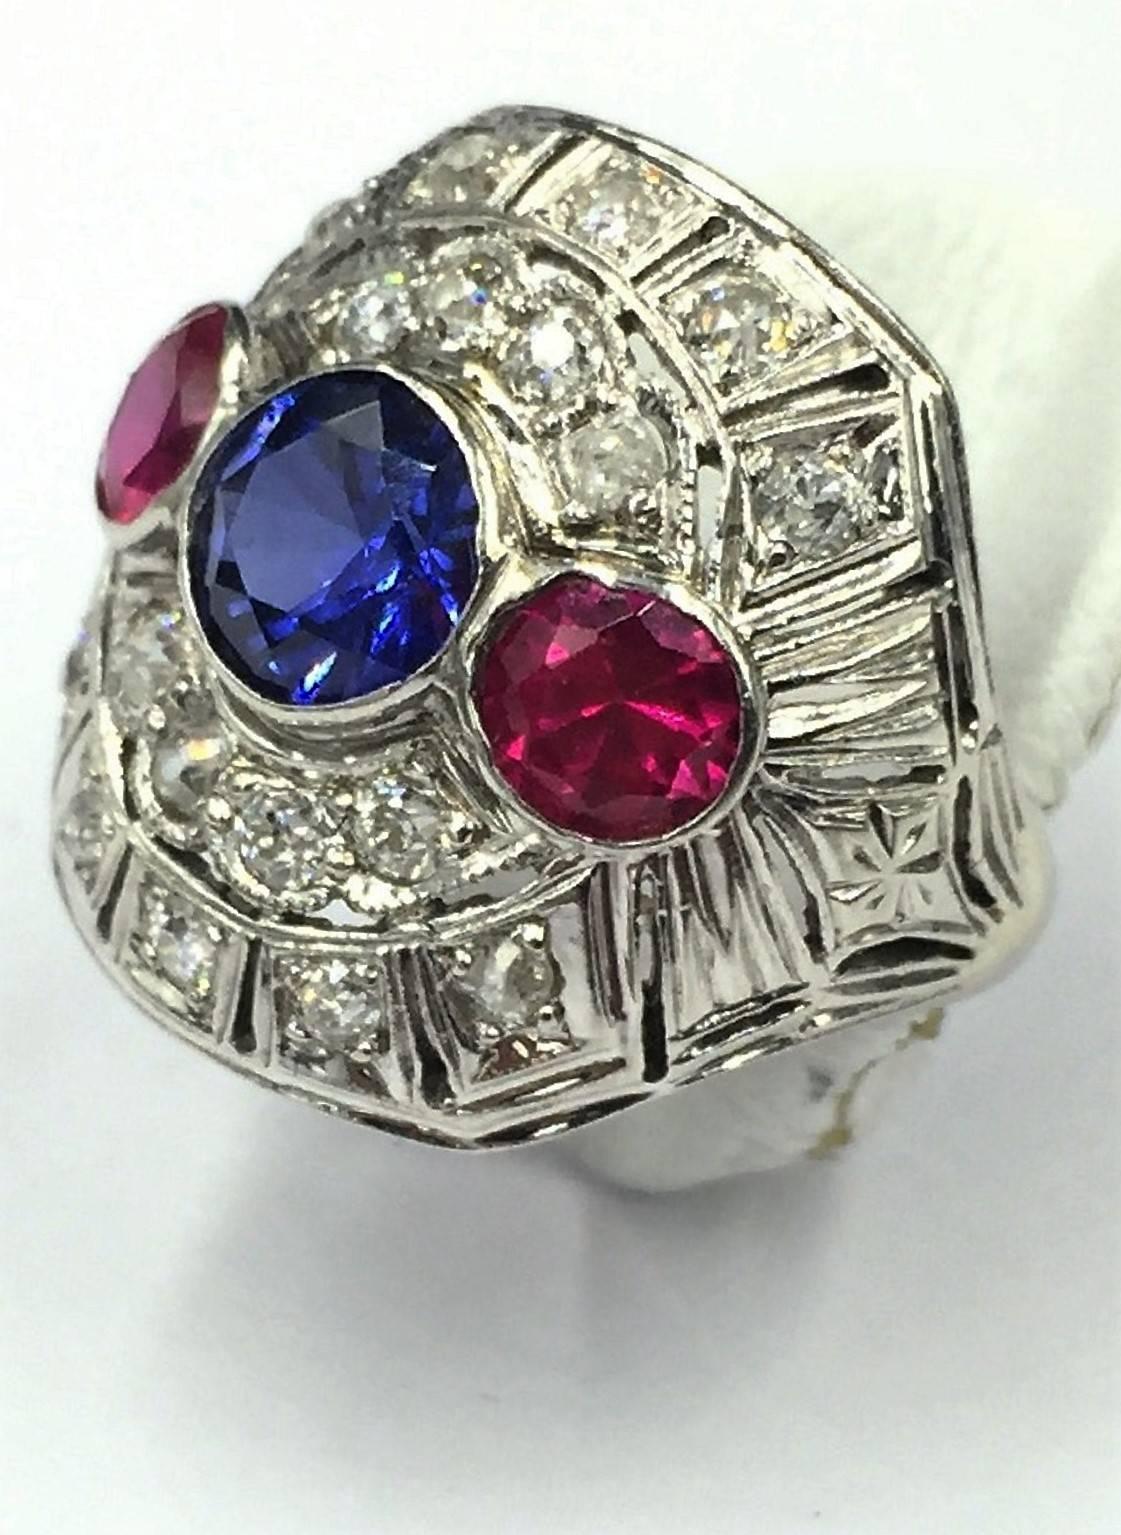 Magnificent Art Deco Ruby, Sapphire, & Diamond on White Gold Filigree Ring In Excellent Condition For Sale In Scottsdale, AZ